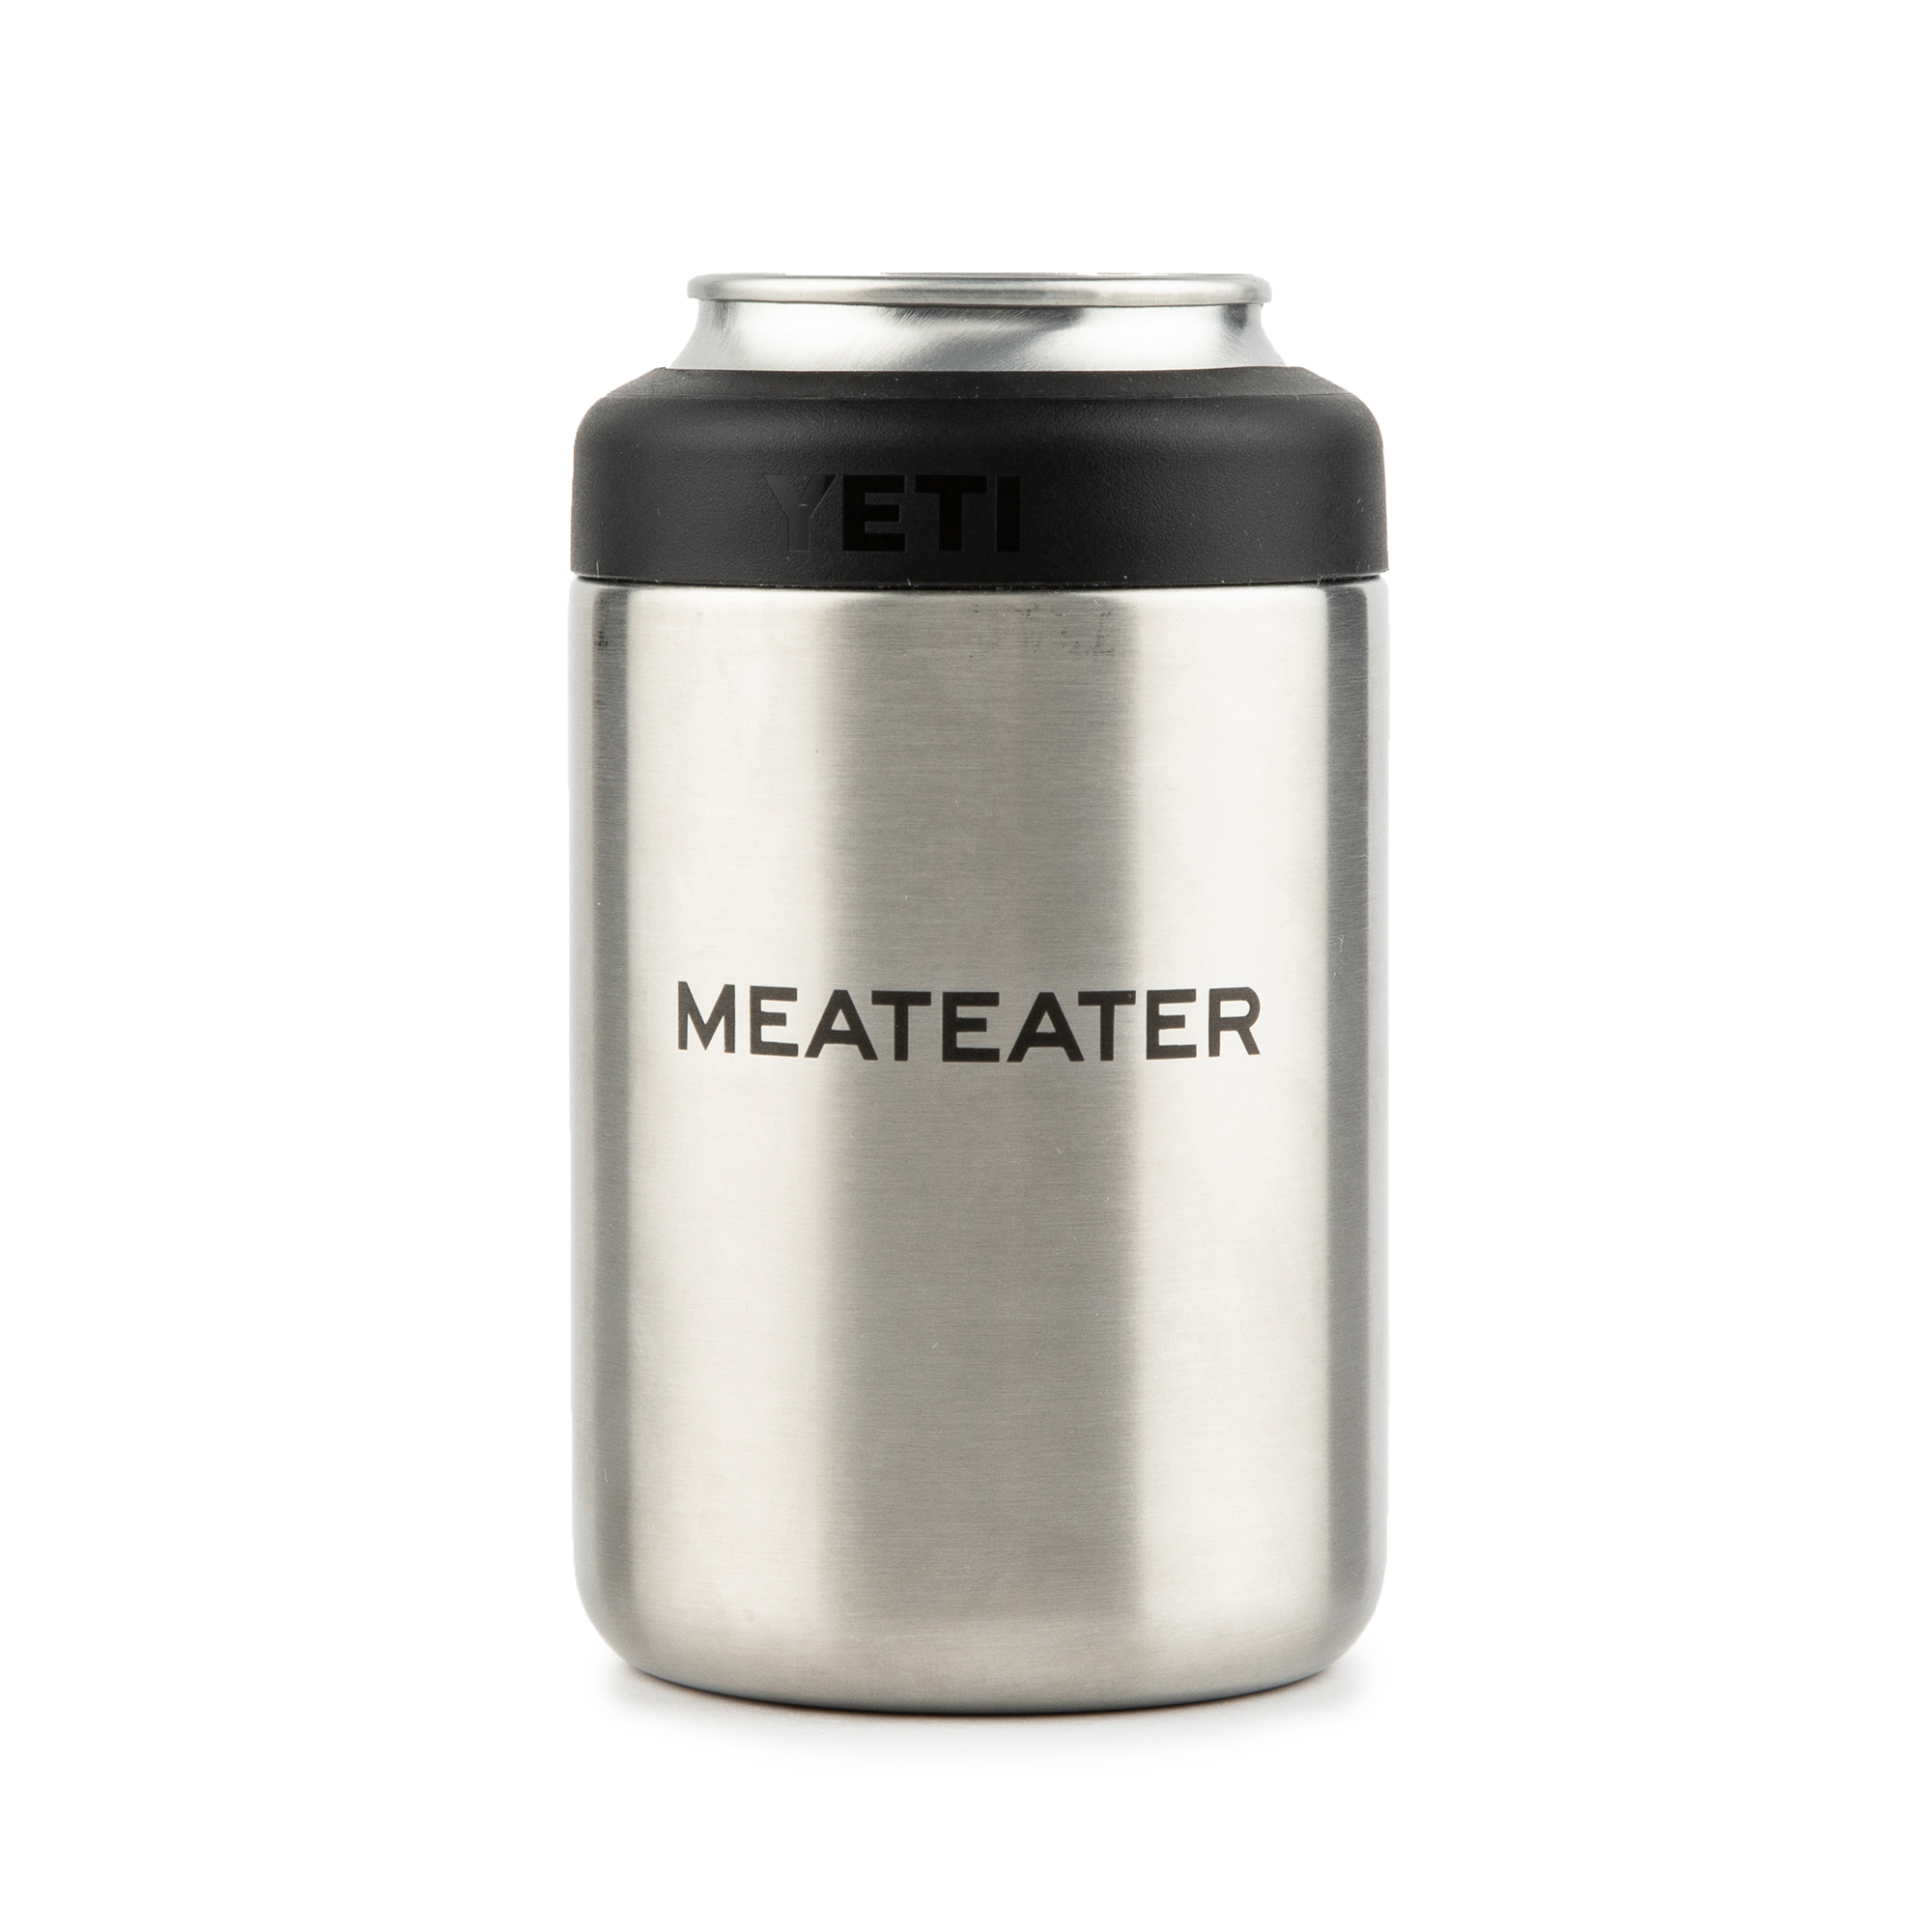 https://store.themeateater.com/on/demandware.static/-/Sites-meateater-master/default/dw9624b4f8/meateater-branded-yeti-rambler-colster/meateater-branded-yeti-rambler-colster_color_stainless.jpg